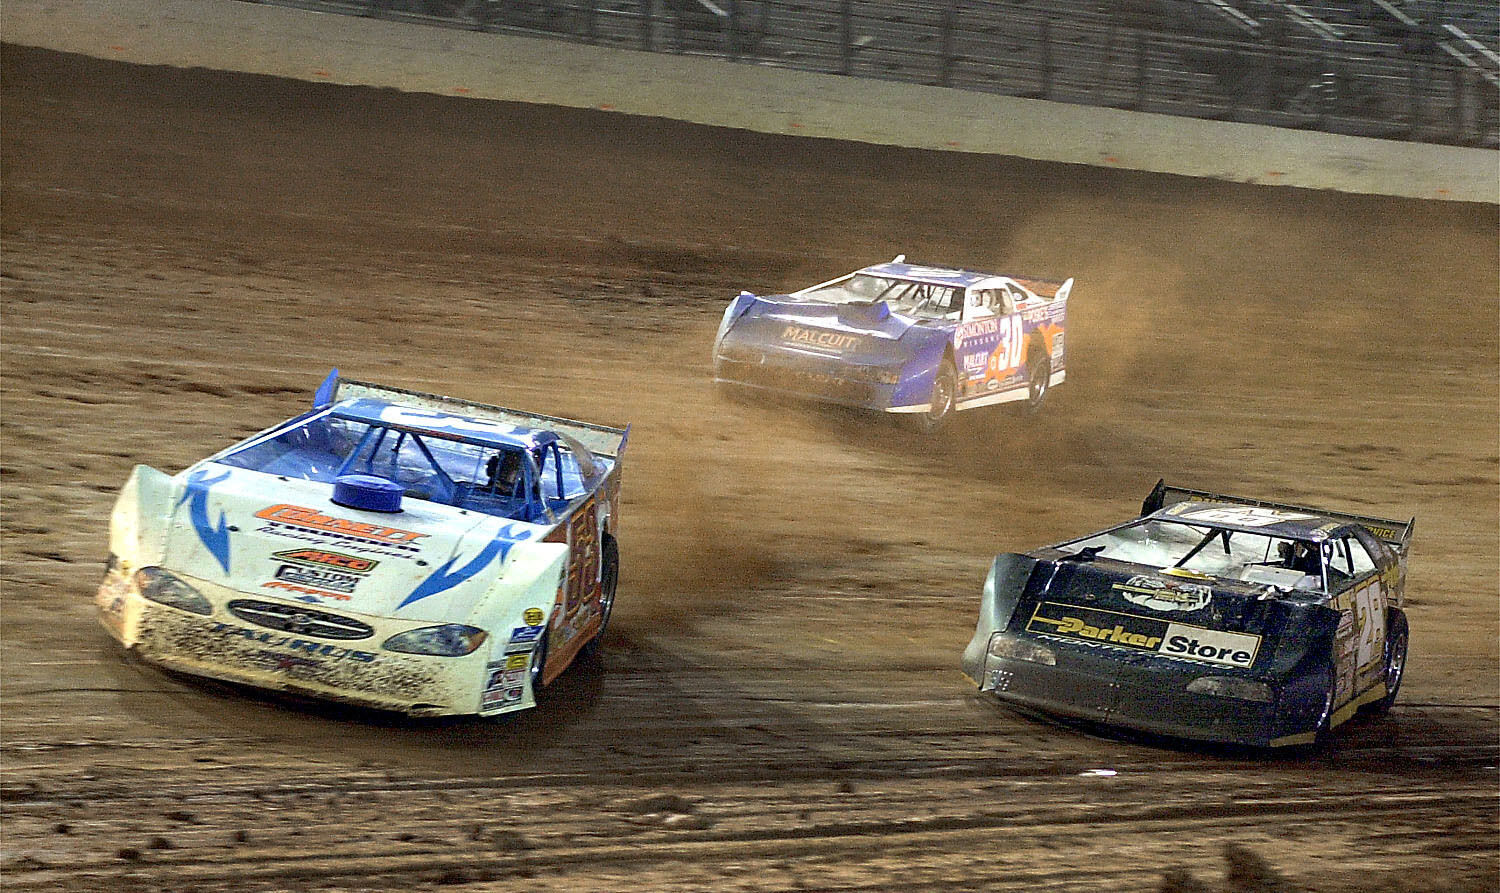 MOTORSPORTS Bristol Dirt Nationals coming to BMS in March